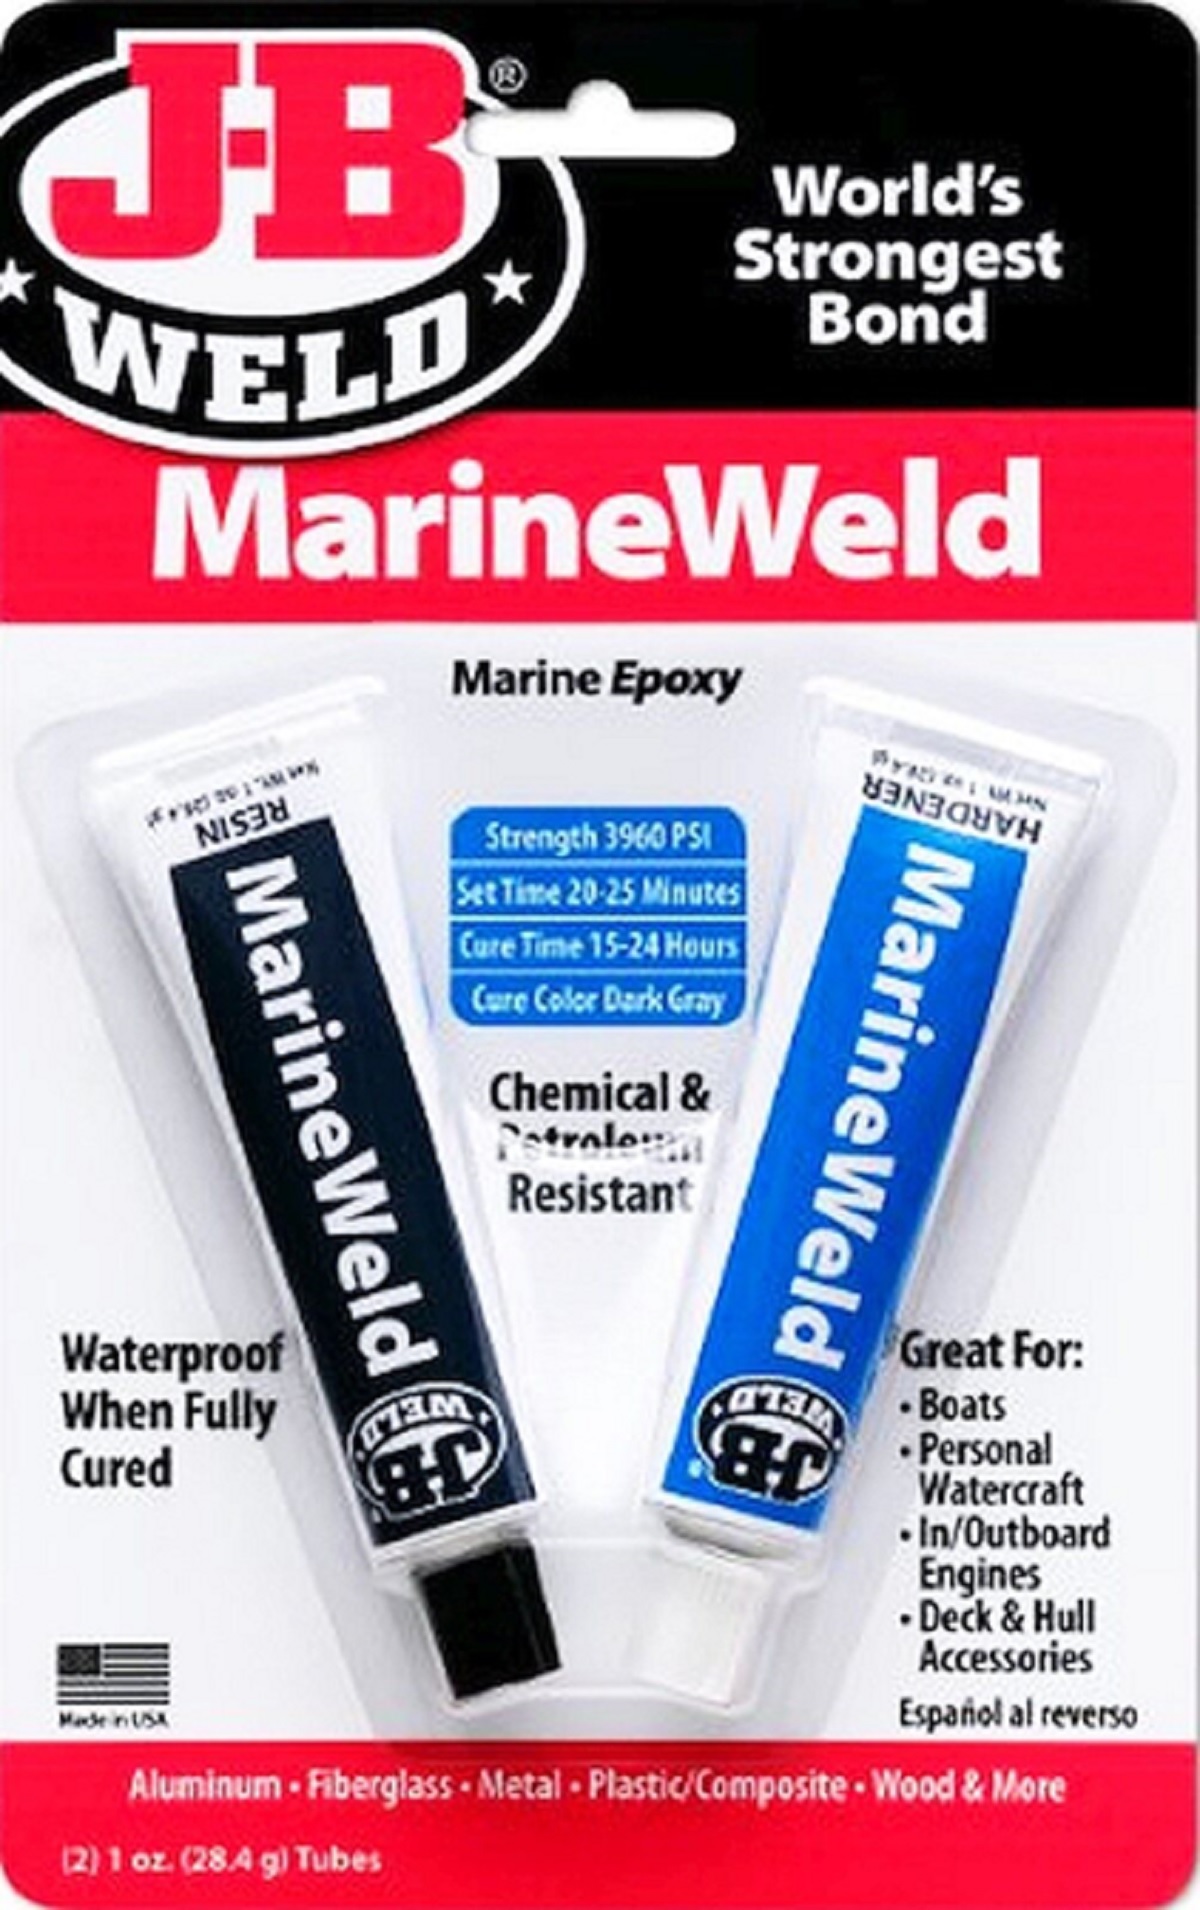 J-B Weld 1oz Gray Marine Weld Epoxy Adhesive Kit is a specially formulated two-part epoxy cold weld system that provides for strong, lasting repairs for bonding different or similar surfaces - image 1 of 7